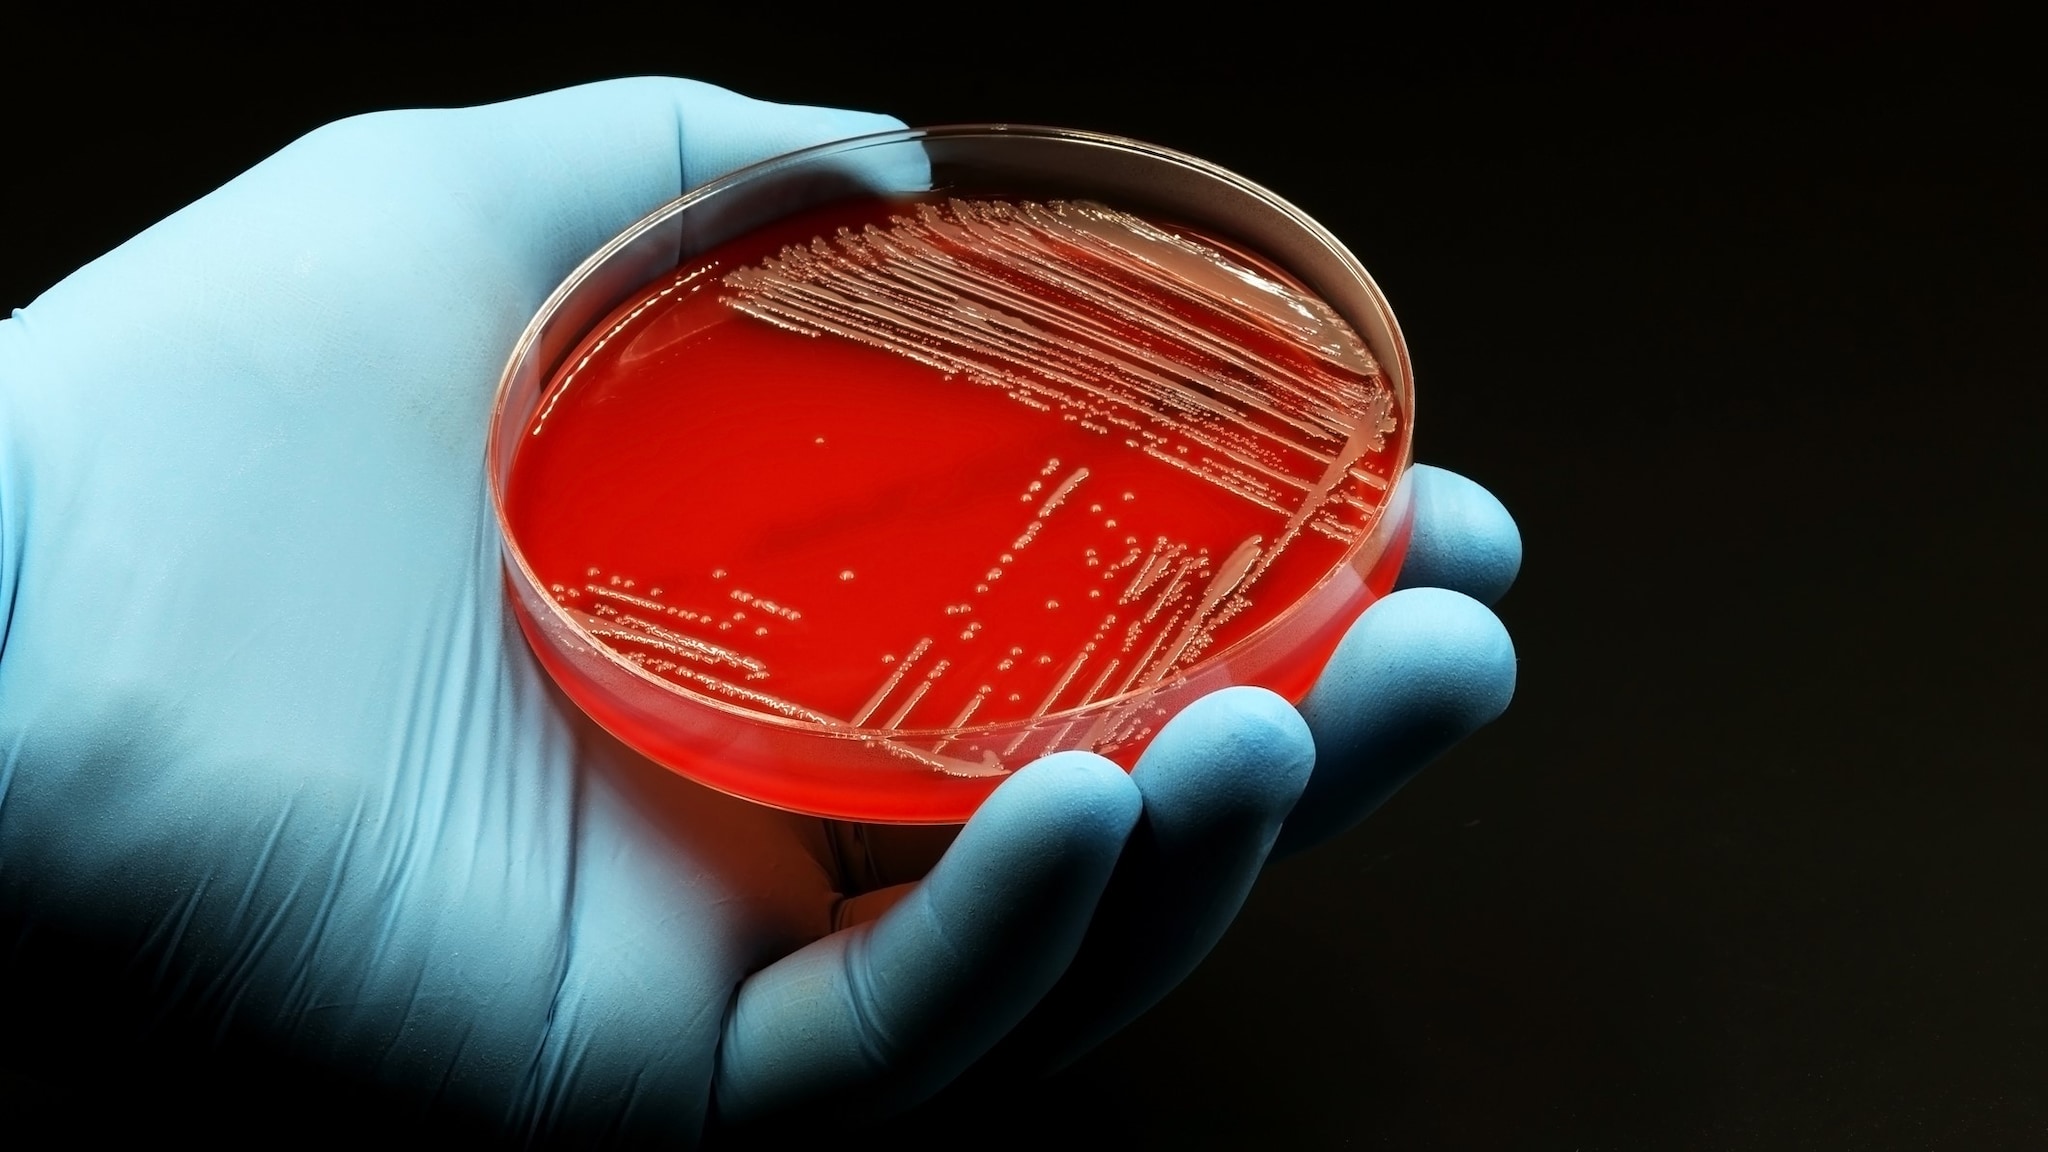 A hand with a blue glove on holding a petri dish with bacteria growing on its red medium inside.